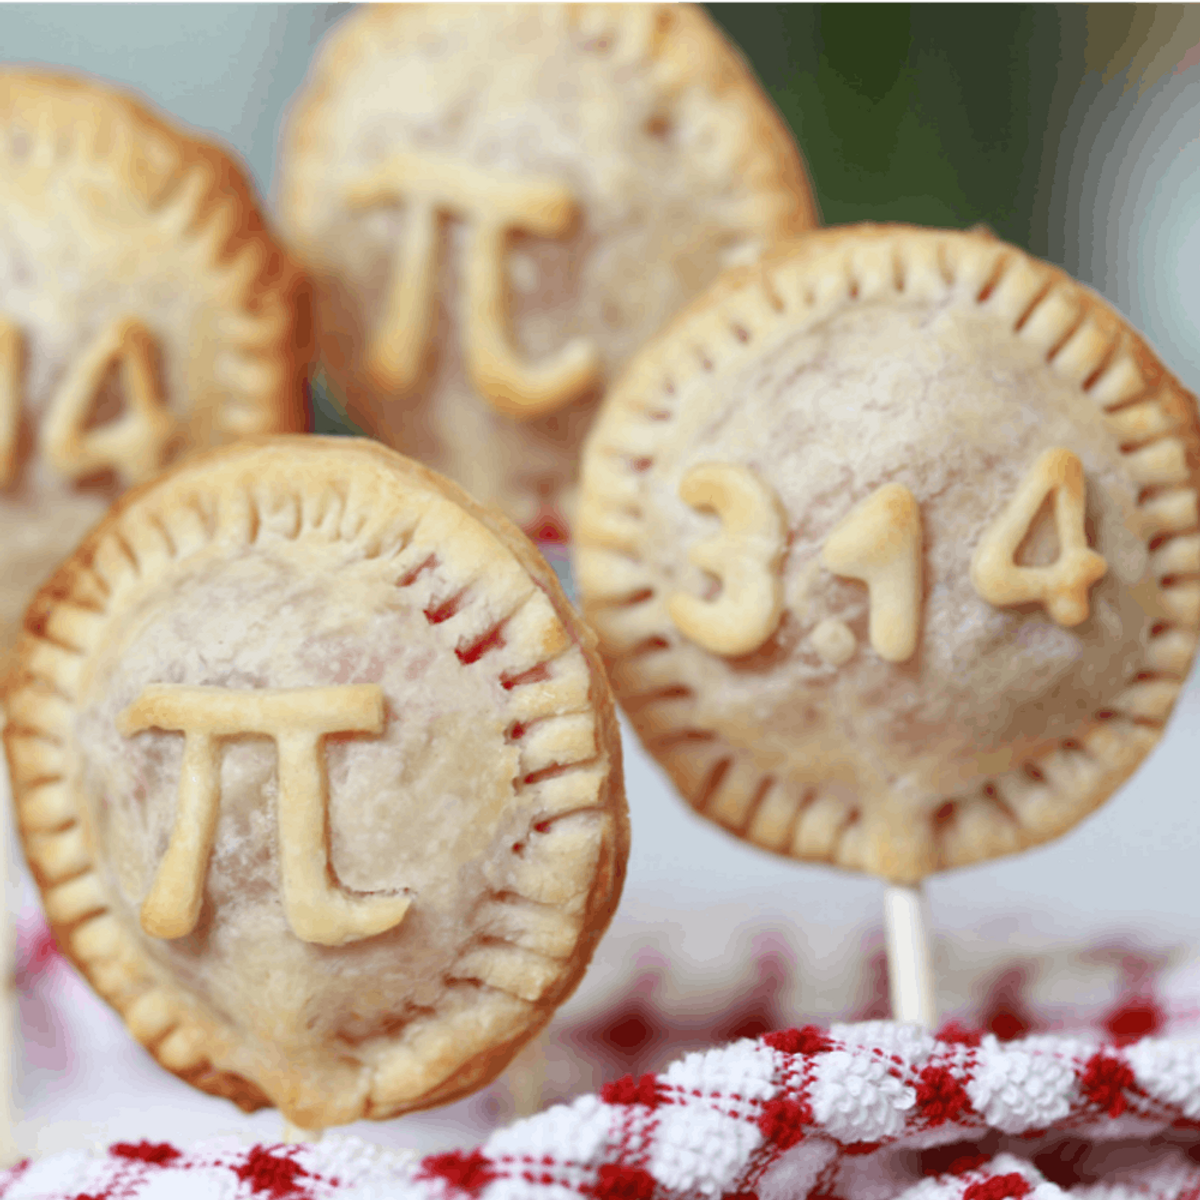 3.14 National Pi(e) Day Giveaways Today